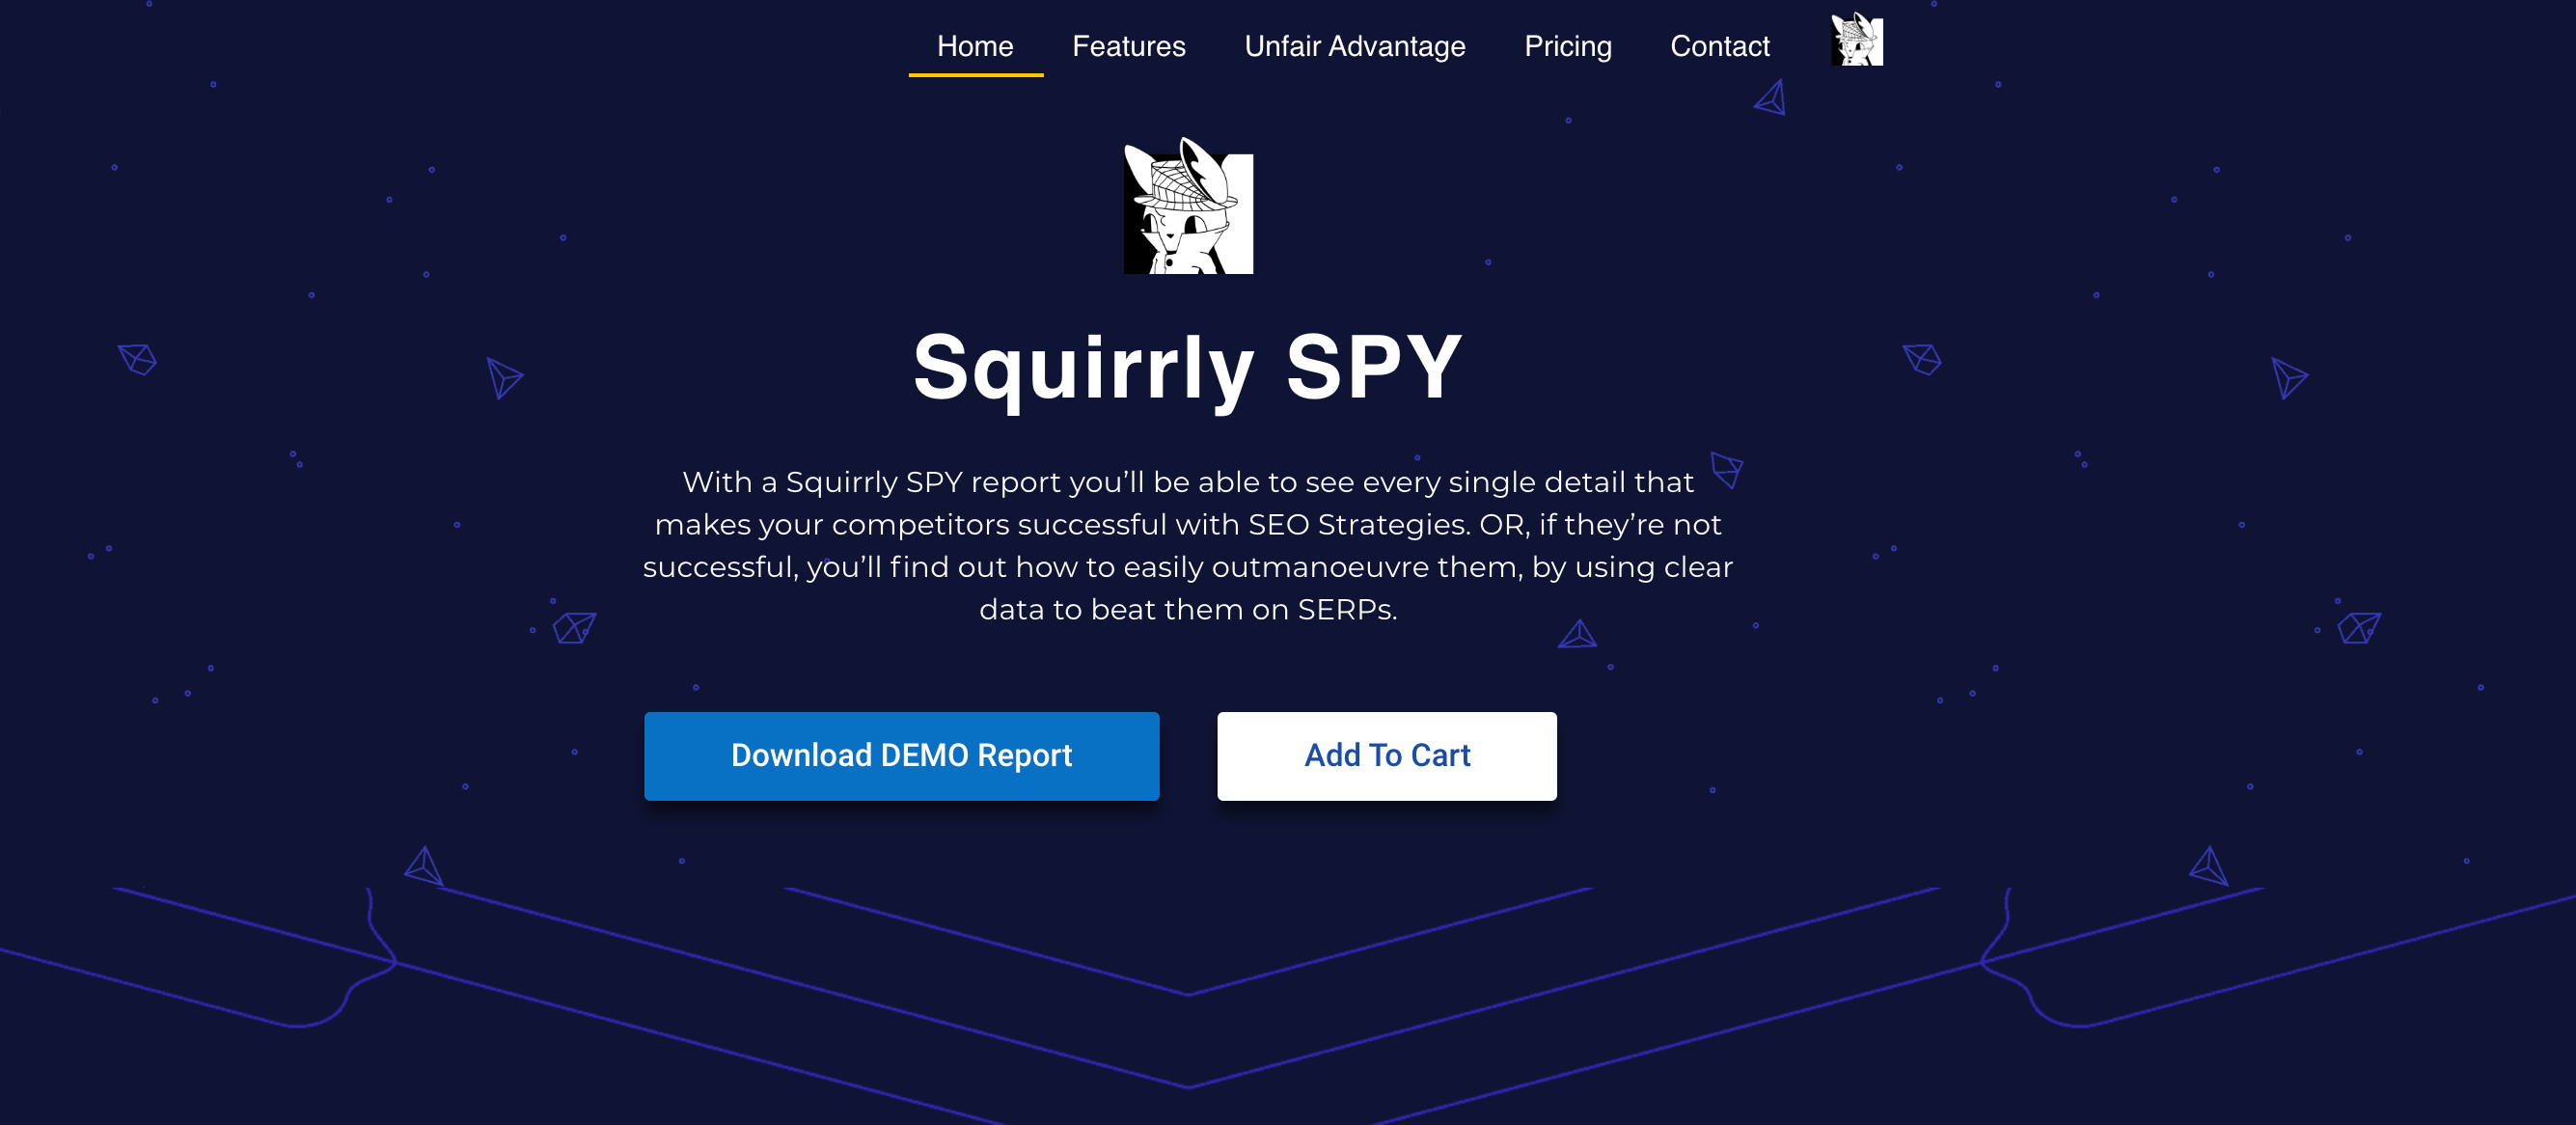 Squirrly Review - Squirrly SPY